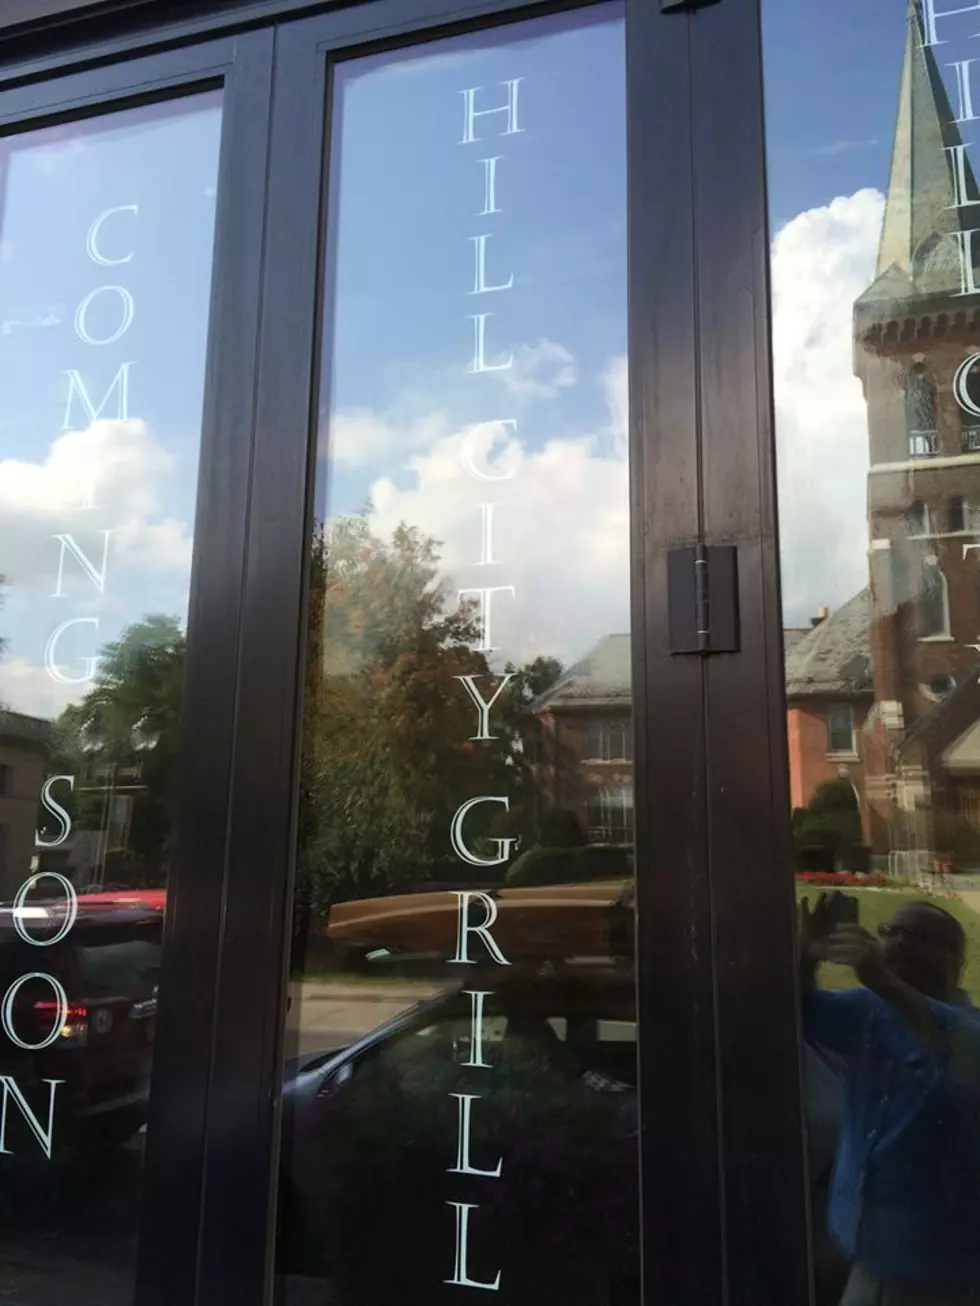 New Oneonta Restaurant To Open Soon:  &#8220;Hill City Grill&#8221;